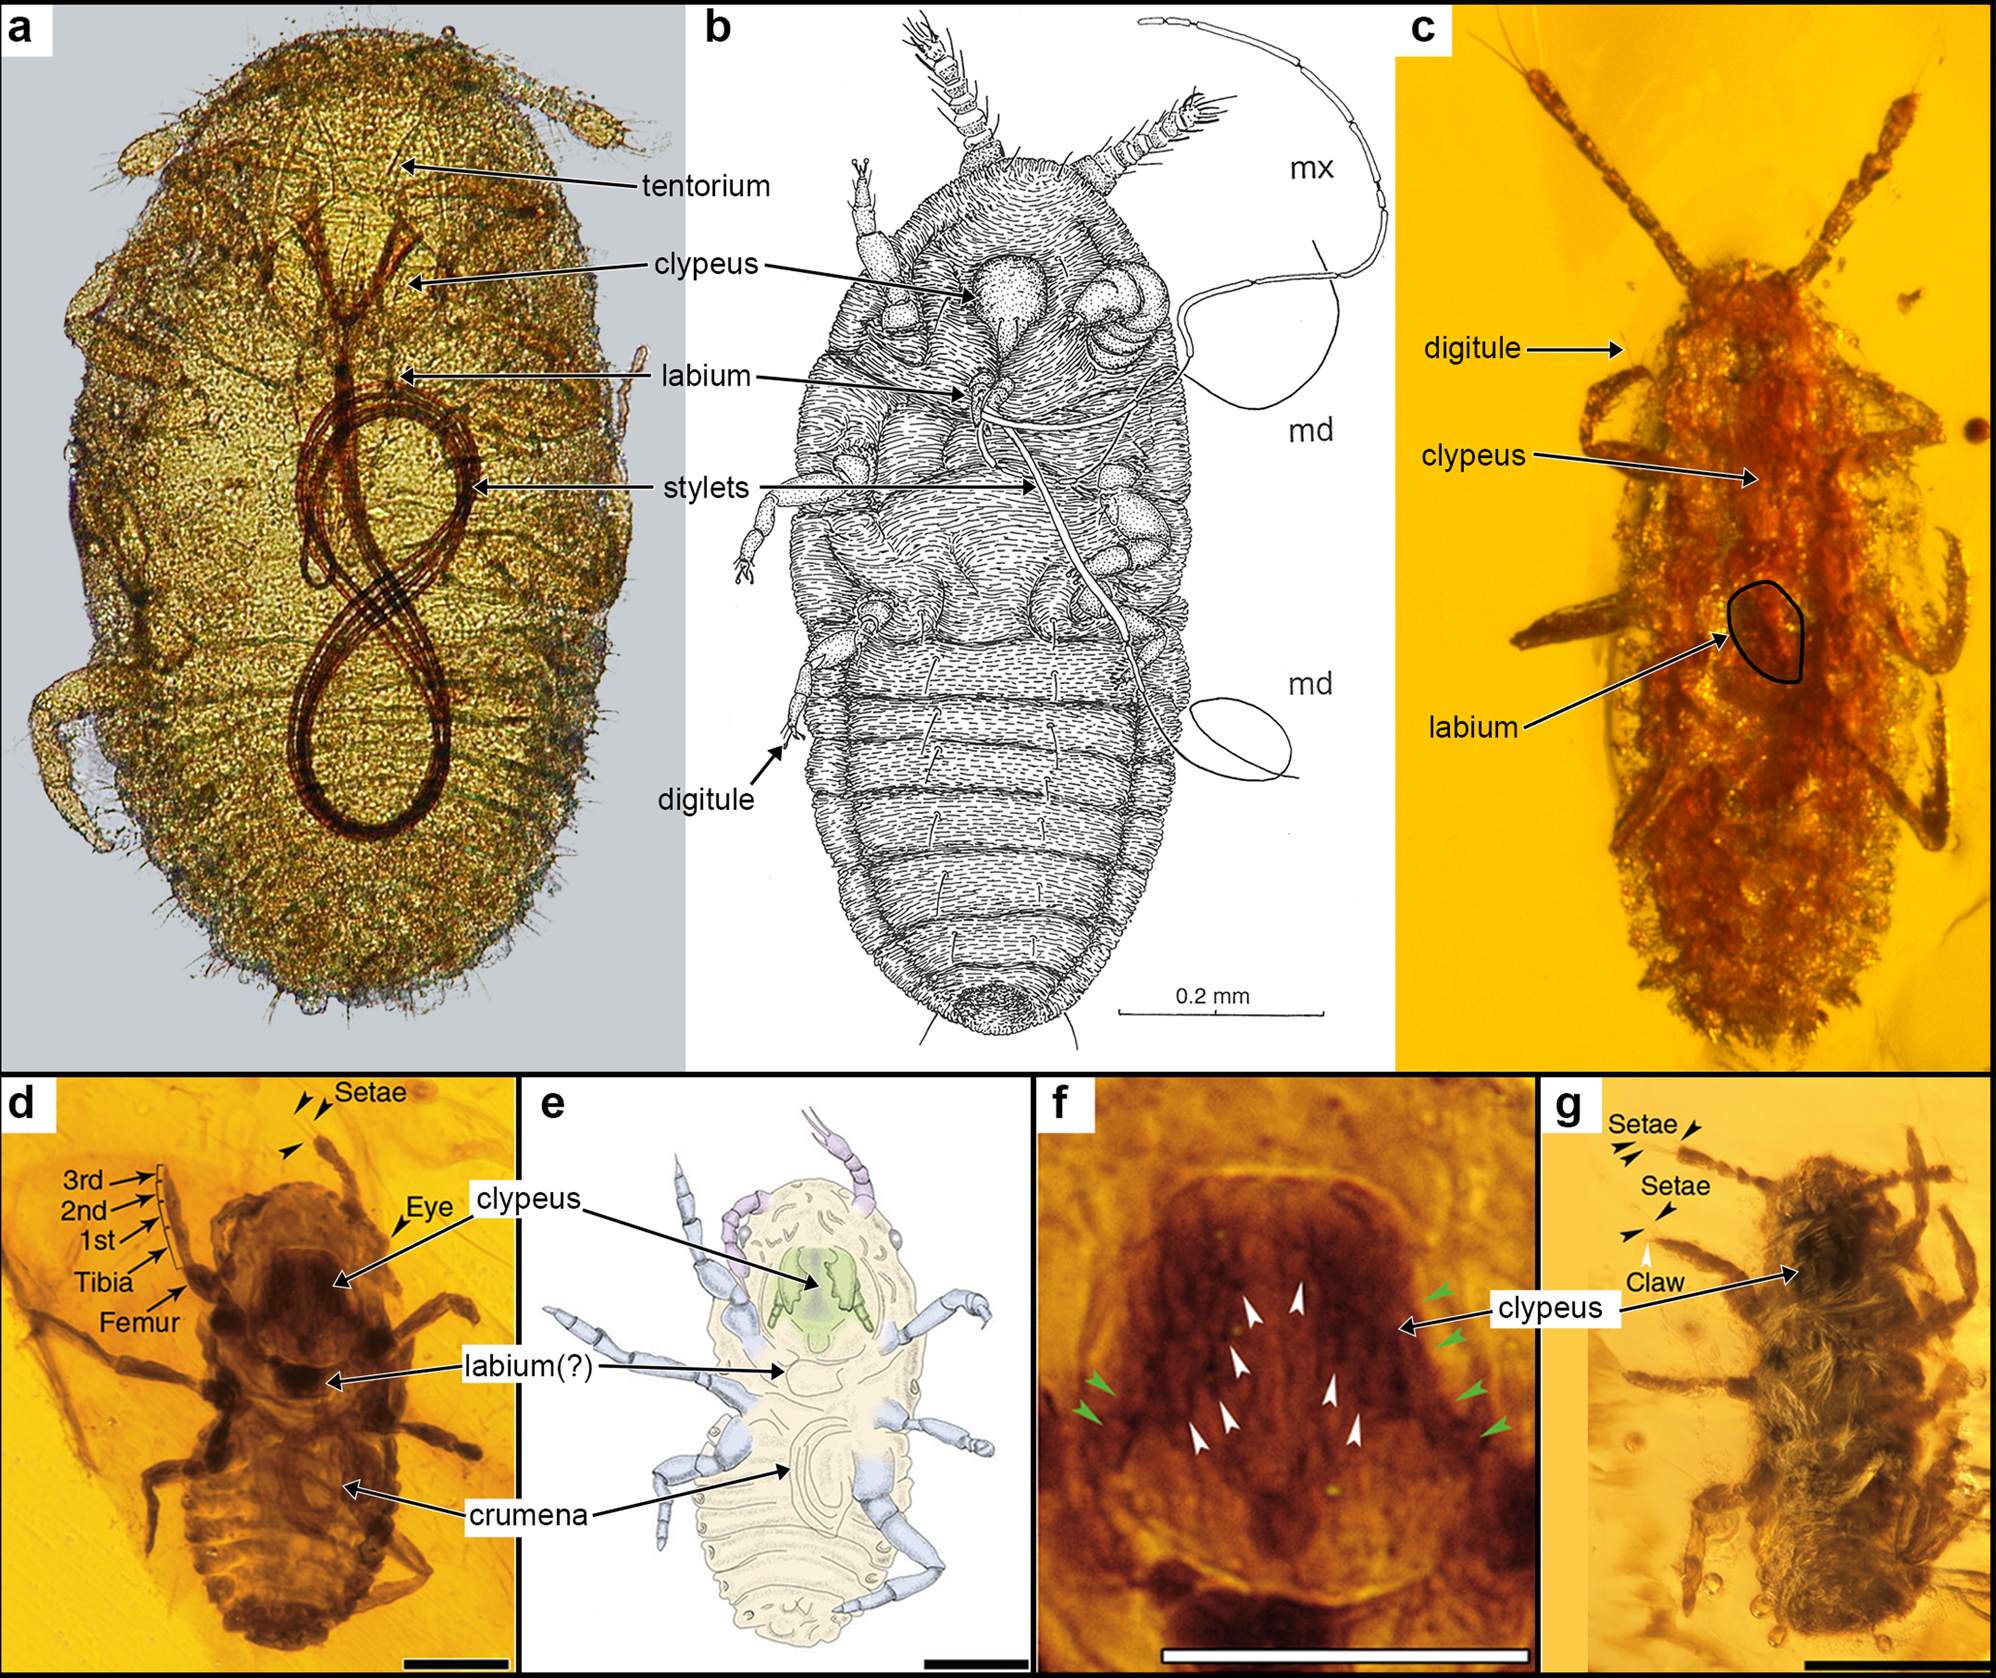 Insects with 100 million-year-old dinosaur feathers are not ectoparasites |  Nature Communications